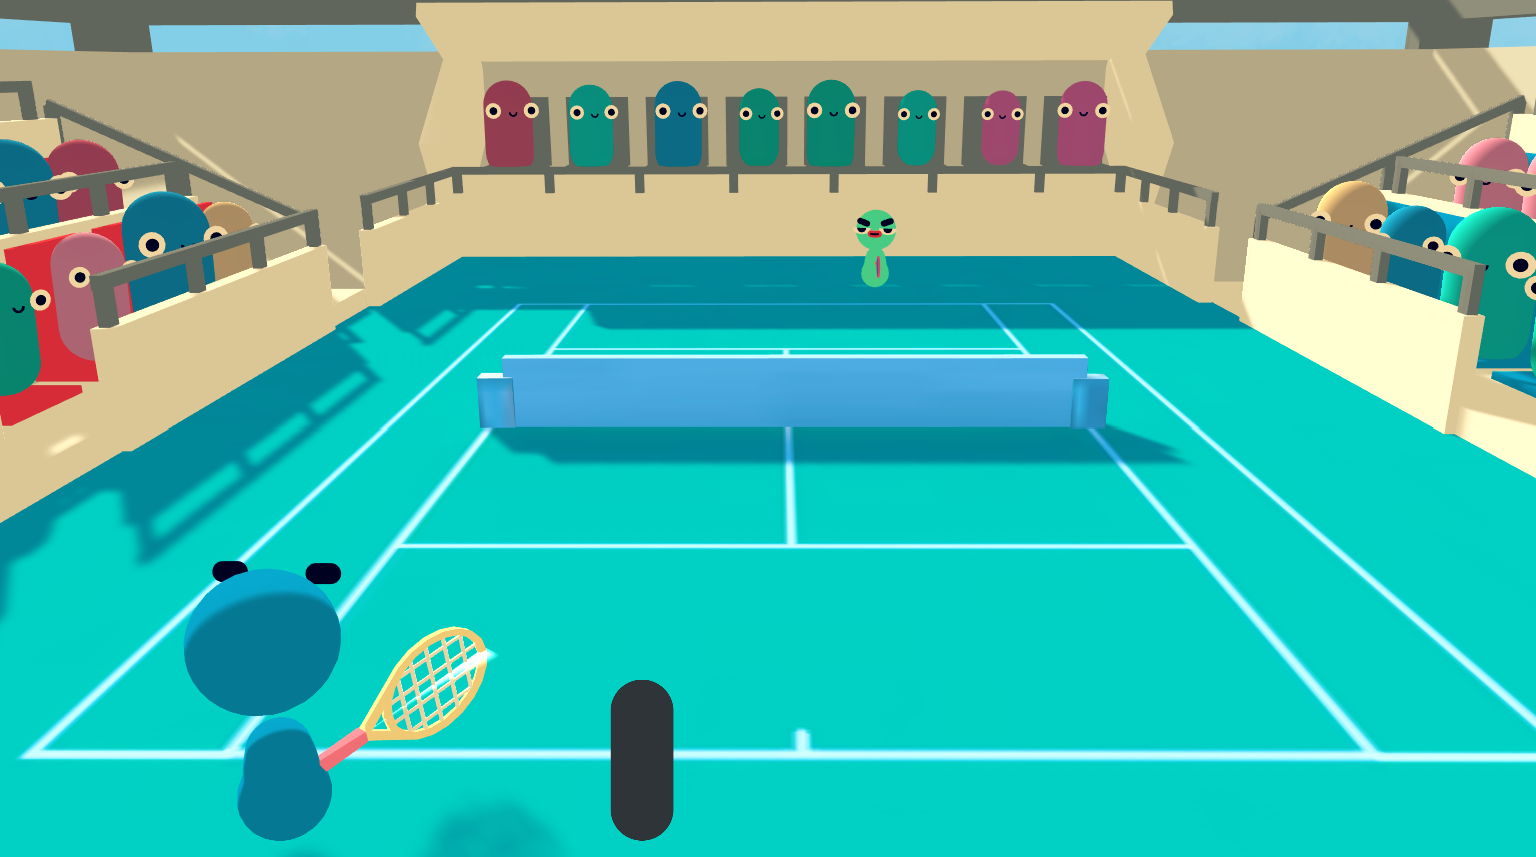 Super Wobbly Tennis by yxmx_rsx for Finally Finish Something 2020 - itch.io